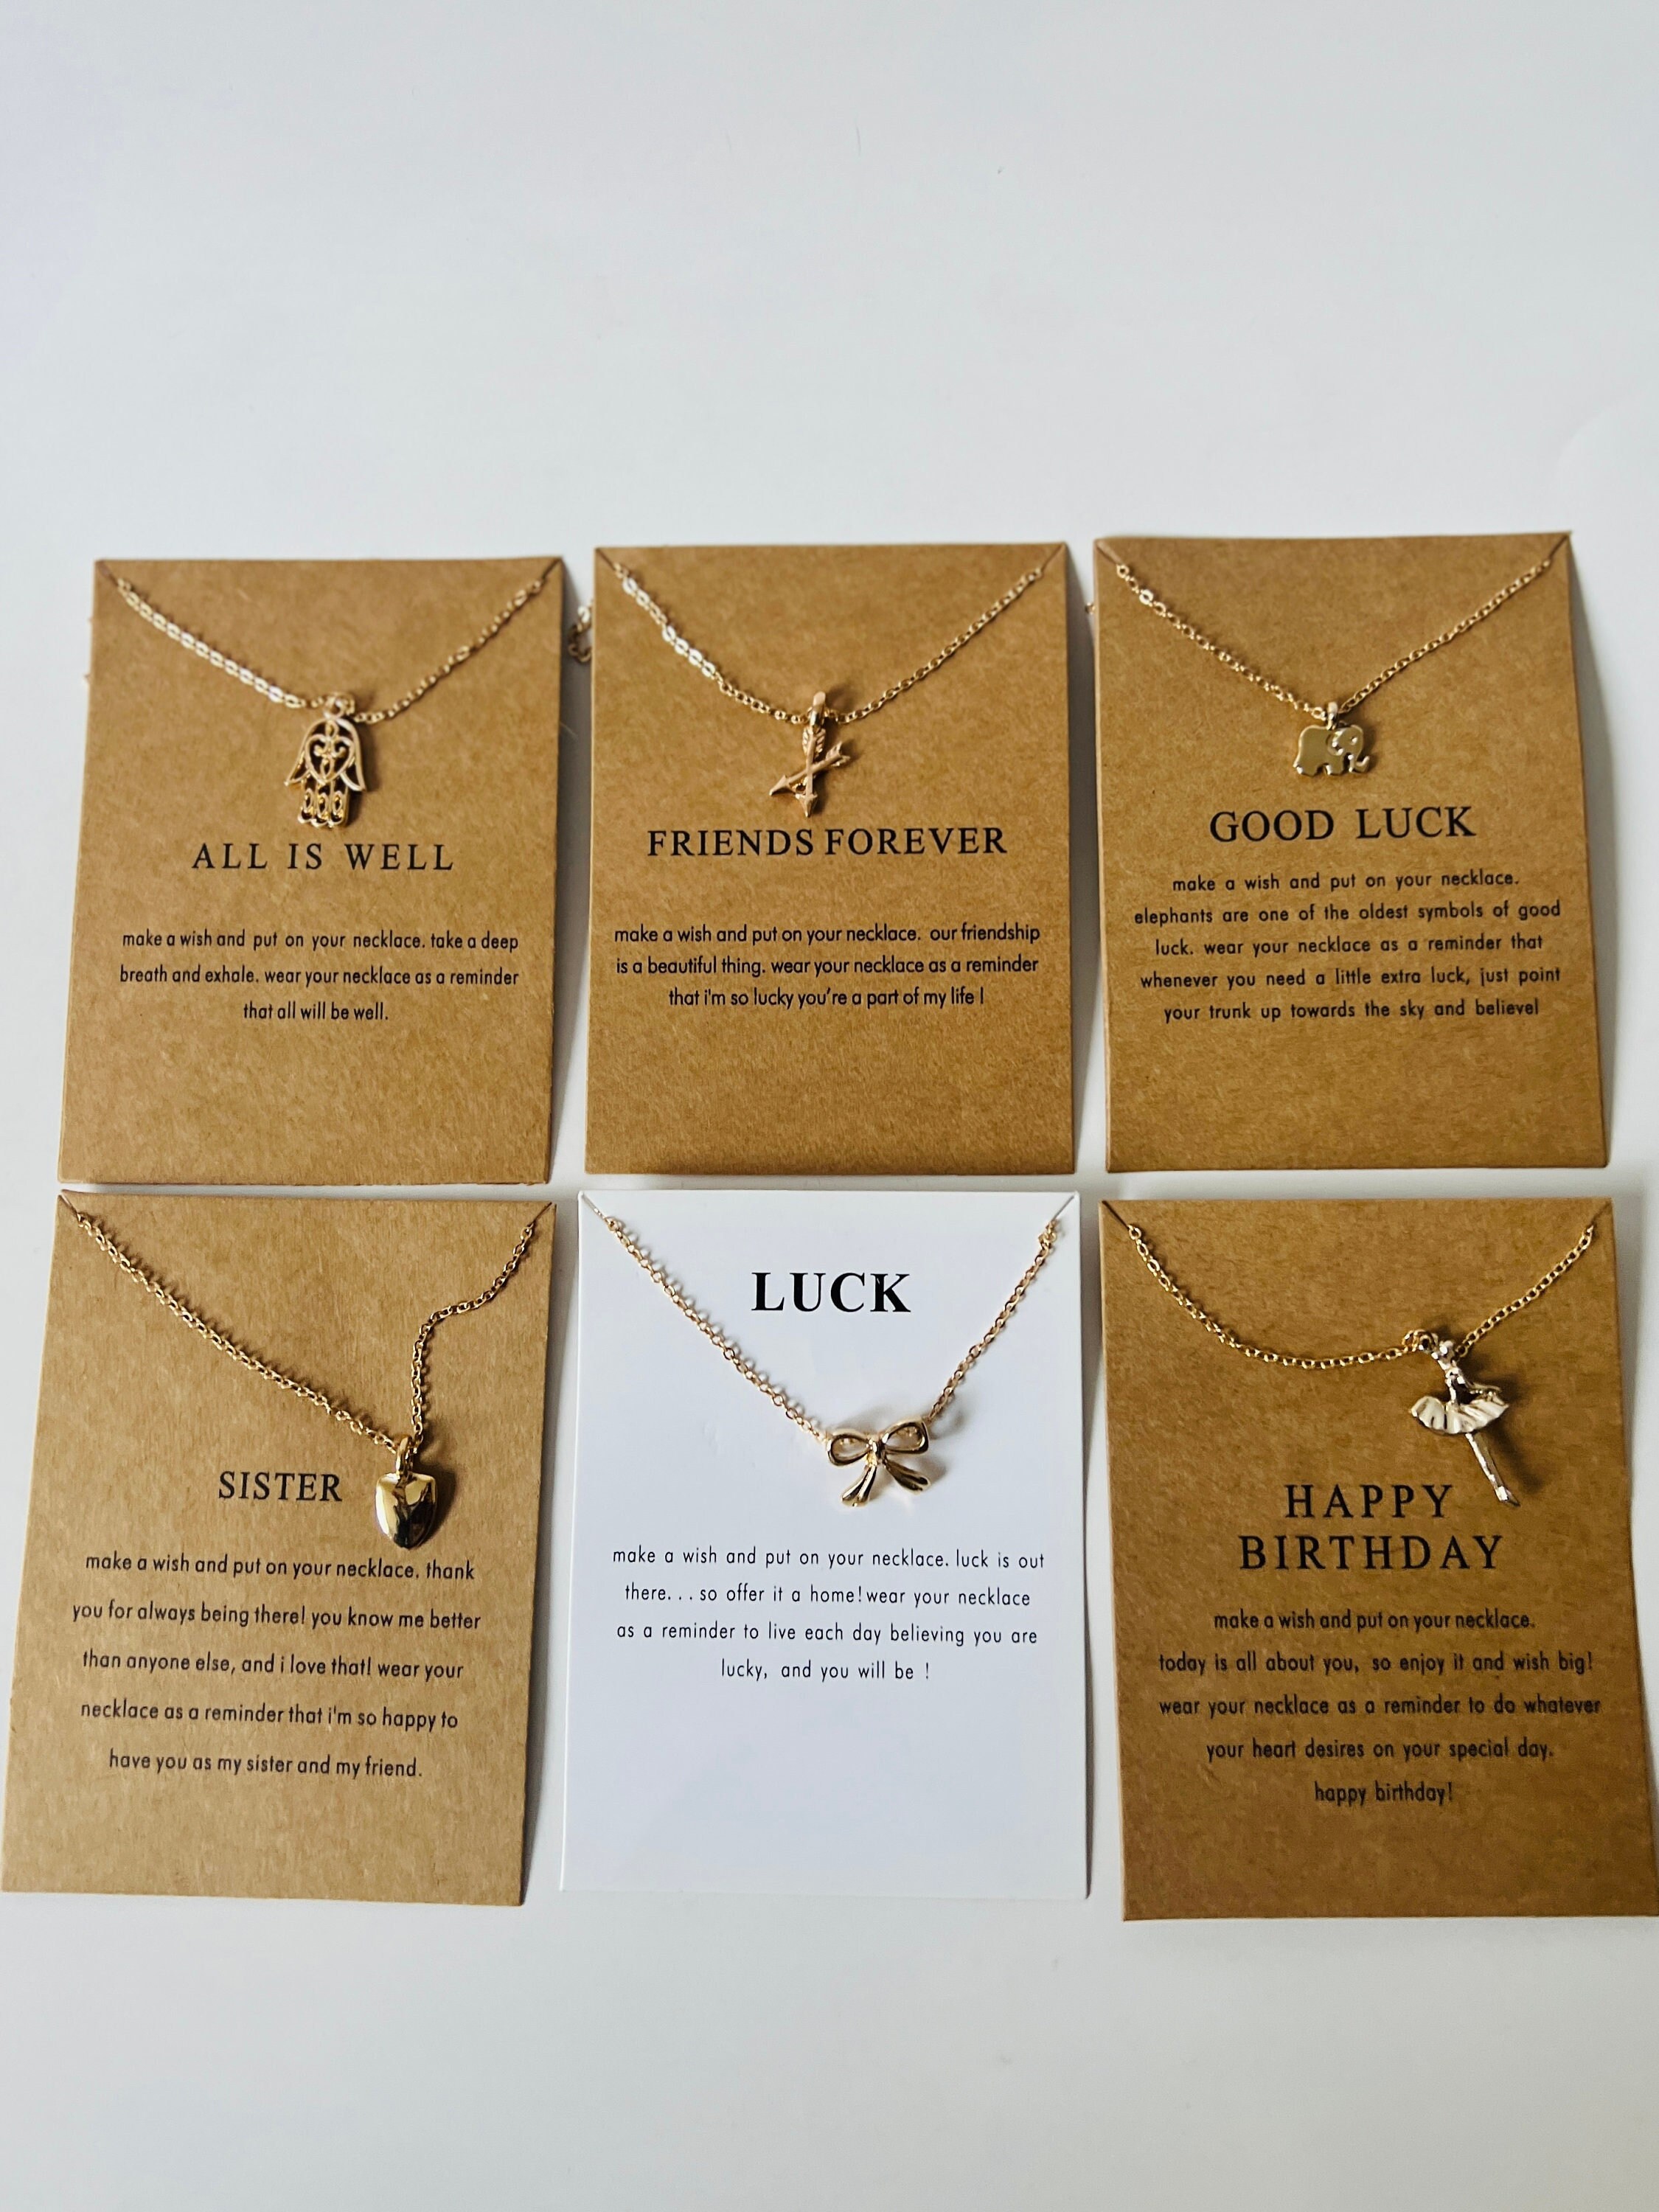 Good Luck Pendant Jewelry Women/necklace With Meaning/ Friend - Etsy